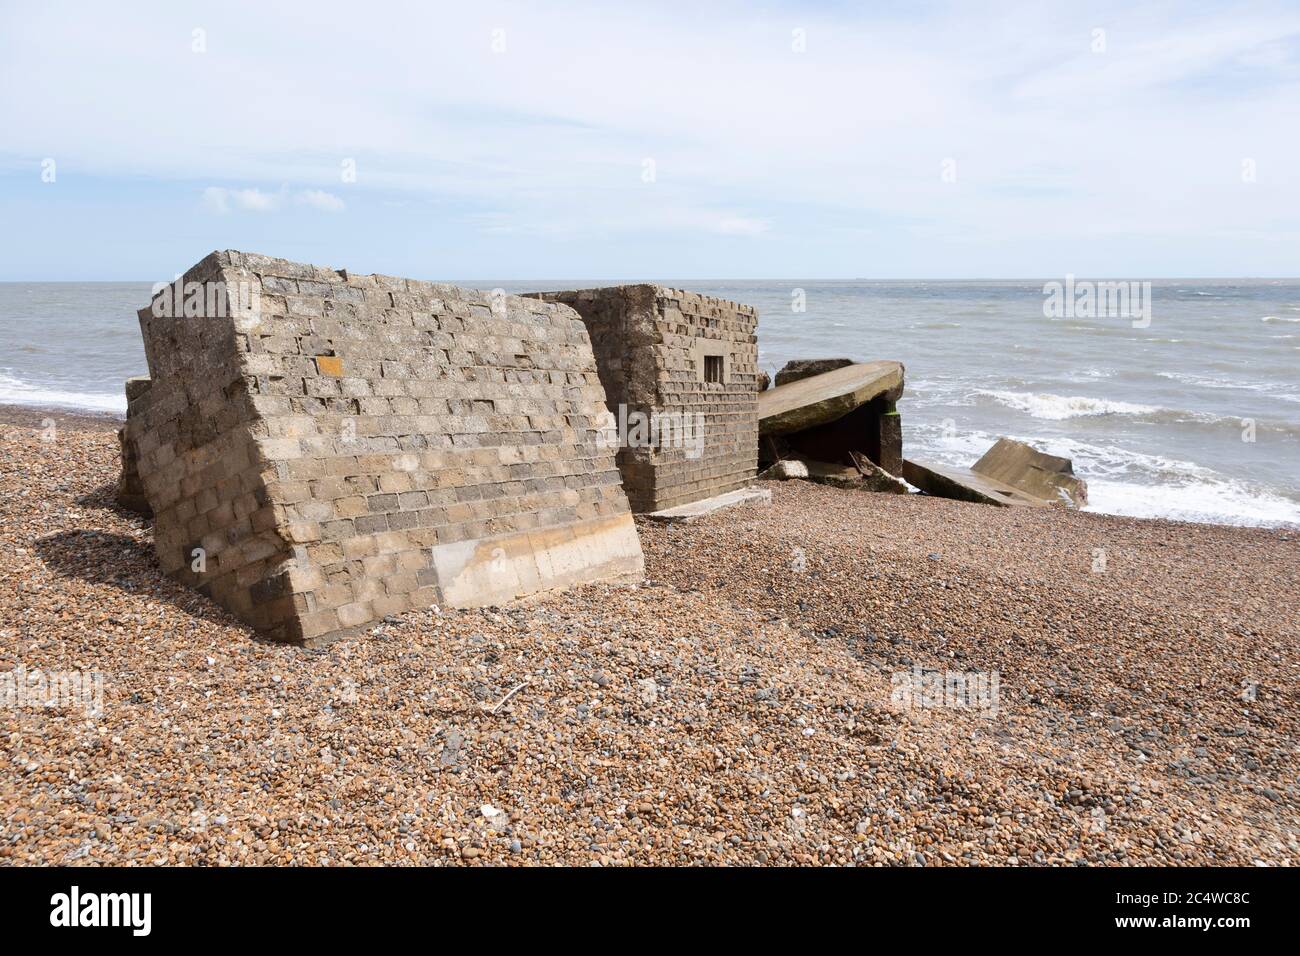 Wartime coastal defences 1940s anti-invasion military structures, Bawdsey, Suffolk, England, UK originally located on cliff top Stock Photo